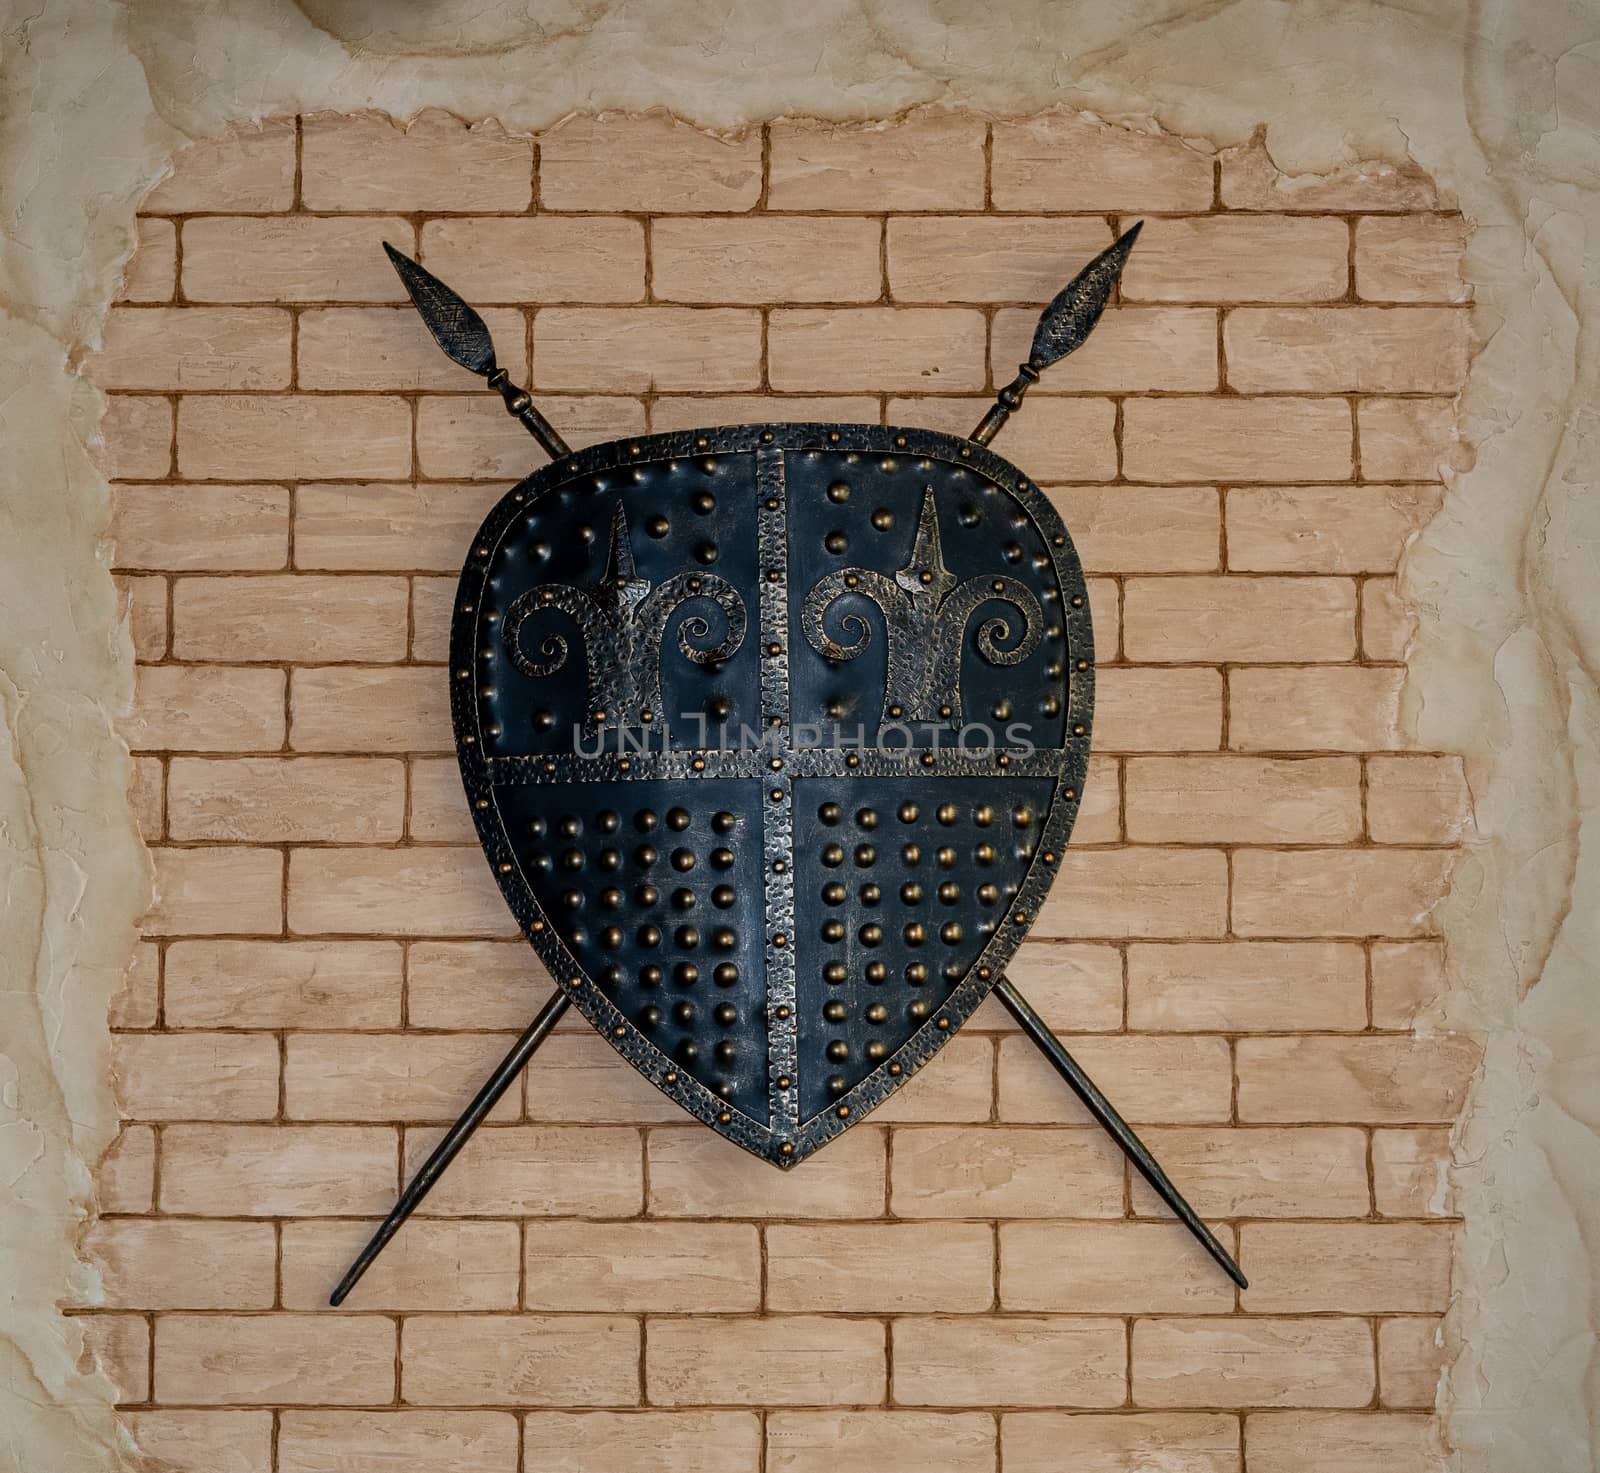 Design of an ancient castle. Brick wall. Shield and spears on the wall. Ancient style.